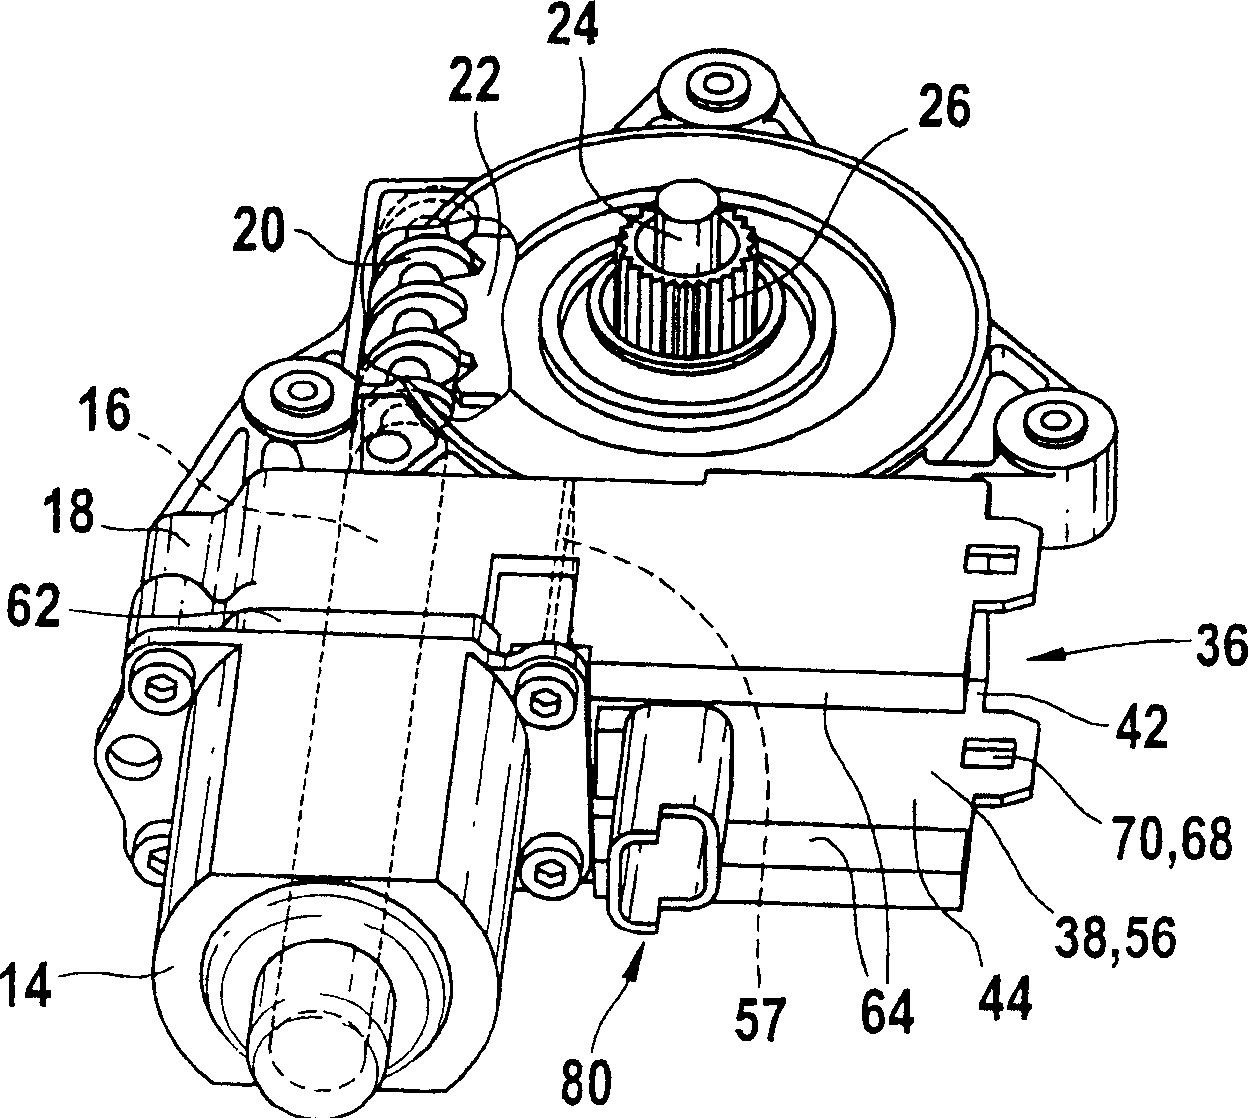 Gearing drive unit comprising an electronics interface